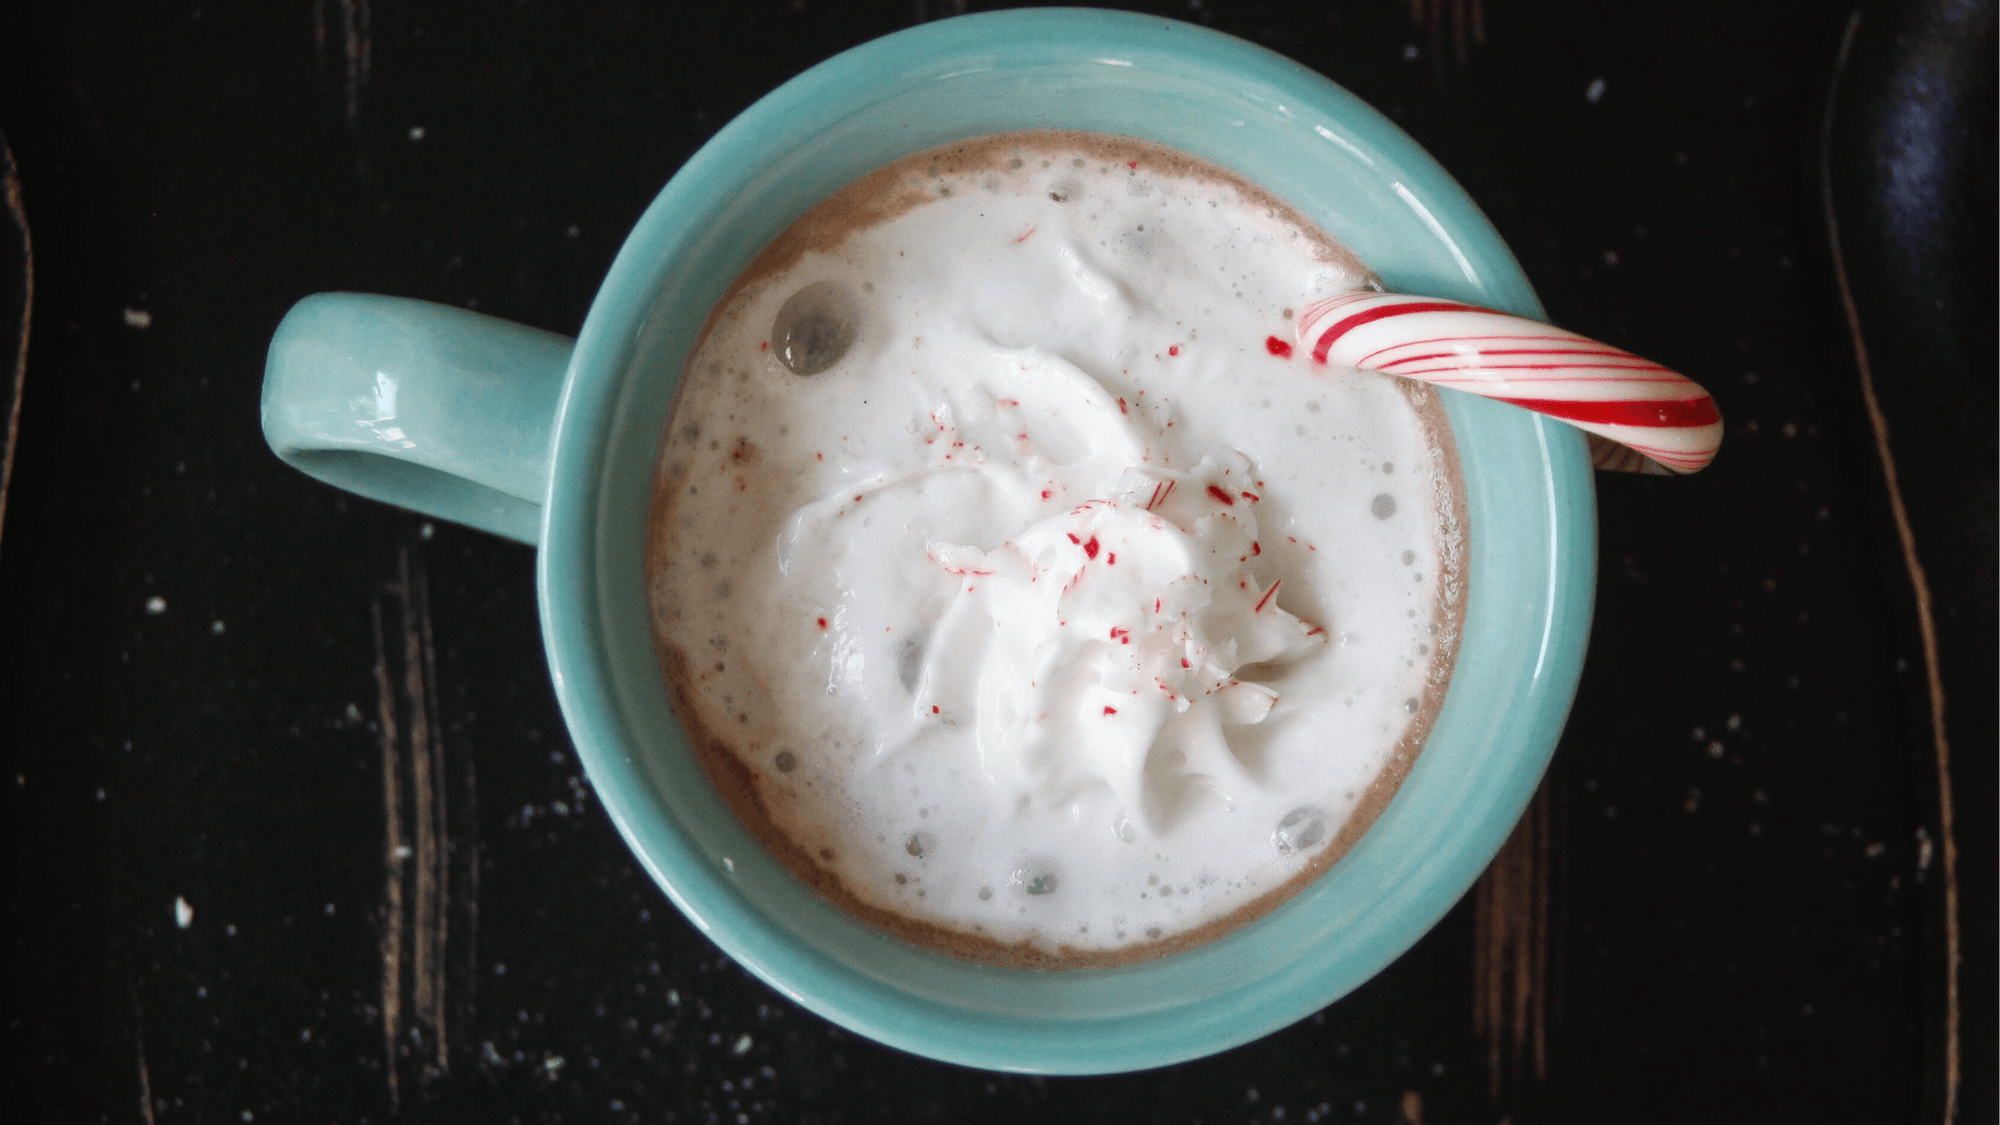 Creamy Peppermint Oat Milk Hot Chocolate with Coconut Whipped Topping